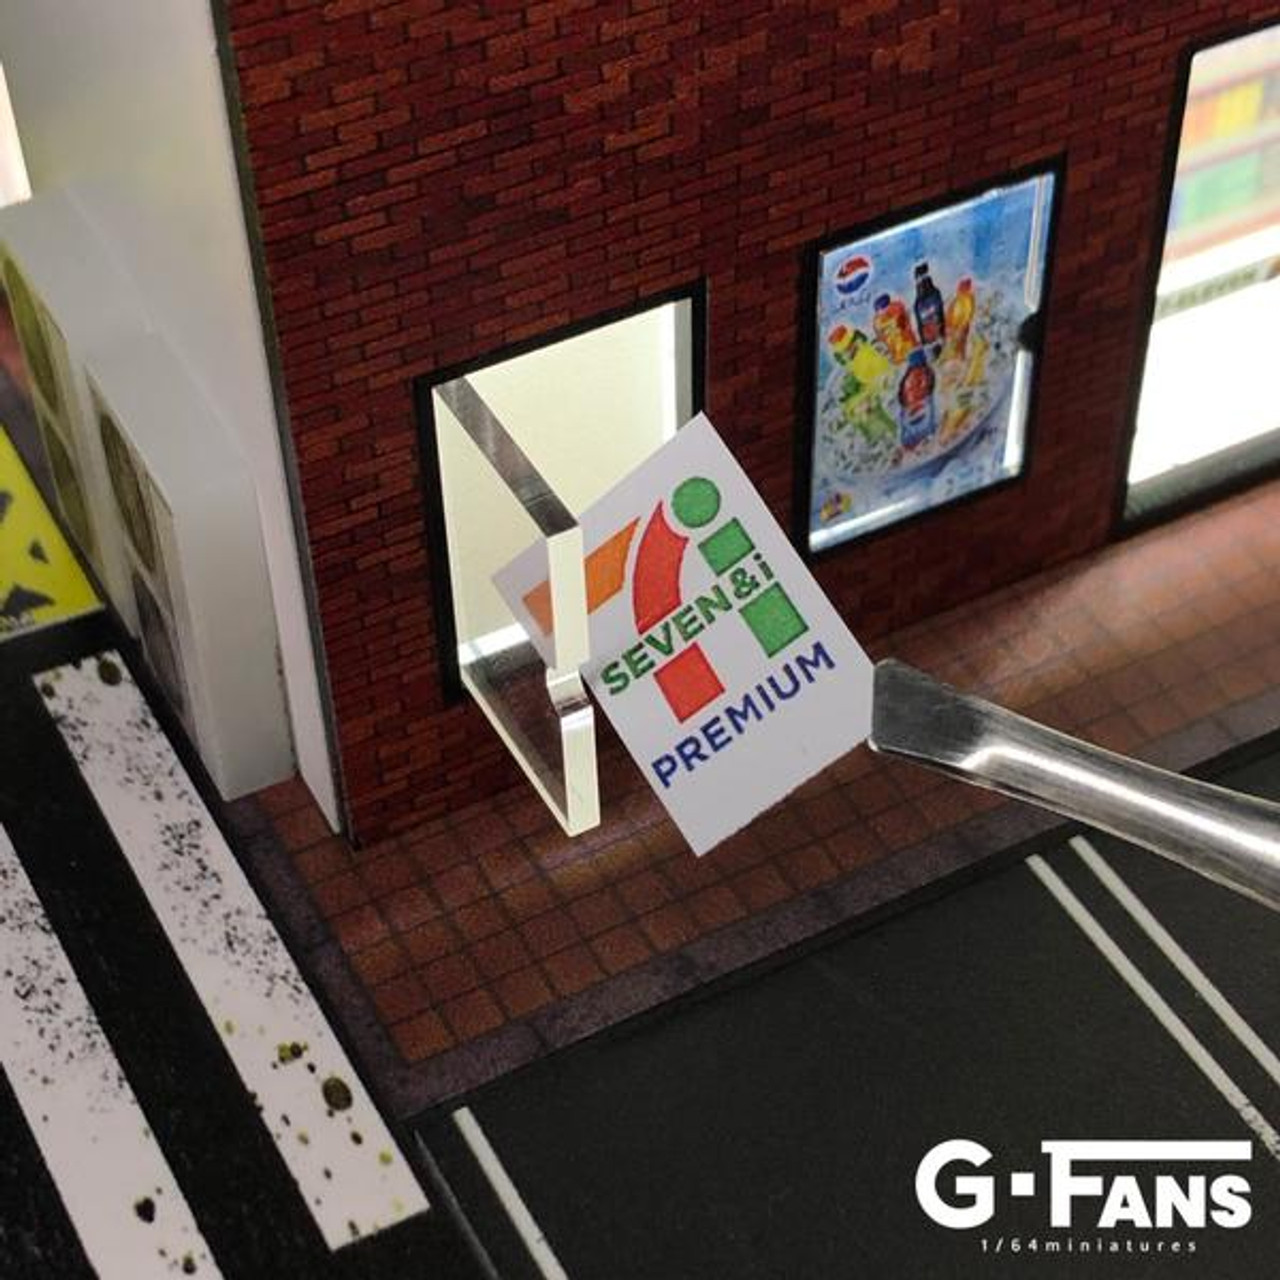 1/64 G-Fans 711 7-Eleven 7-11 Diorama with LED (Car models and Figures NOT included)